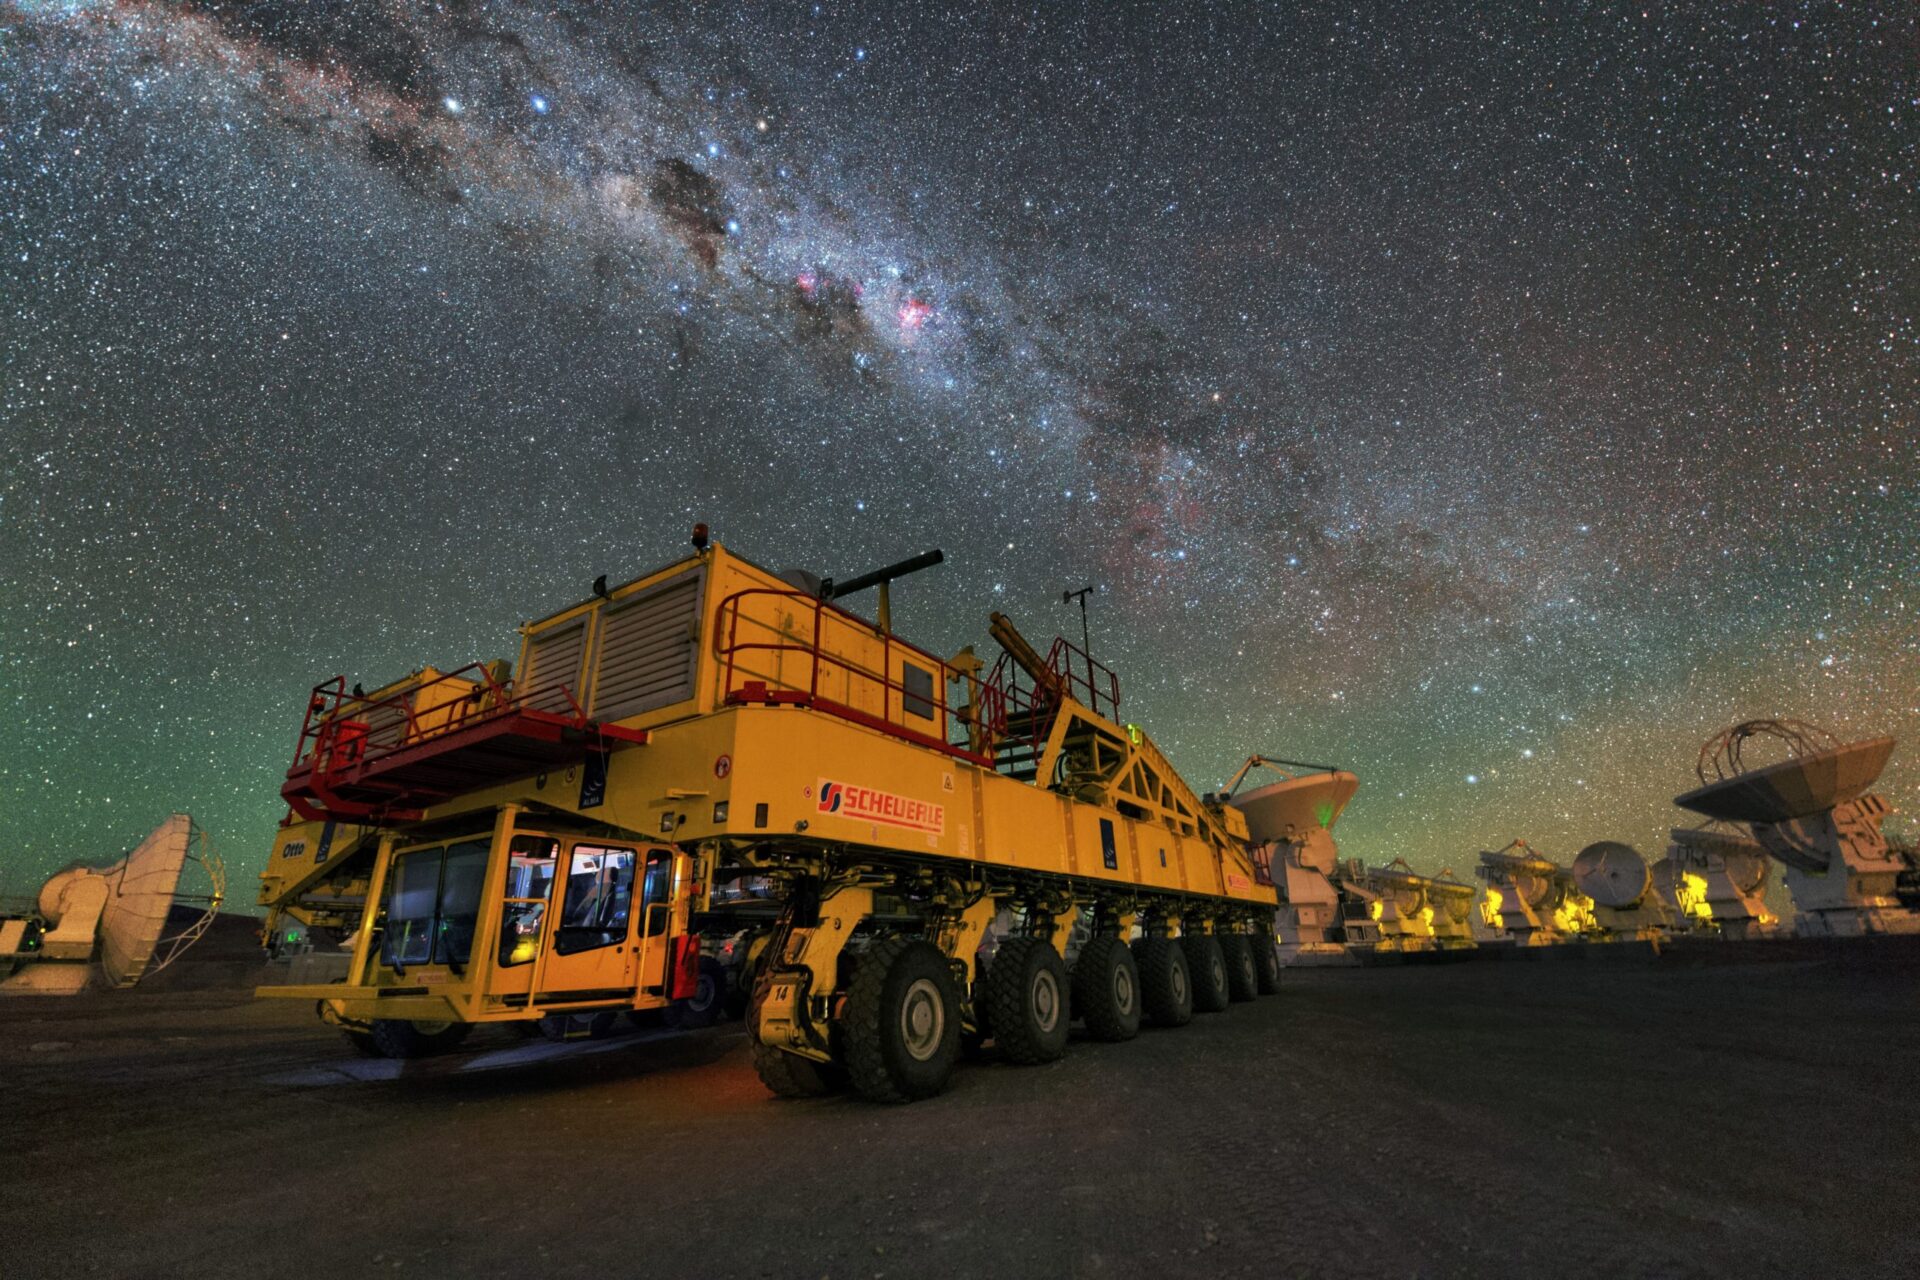 Night view of one of the ALMA transporters